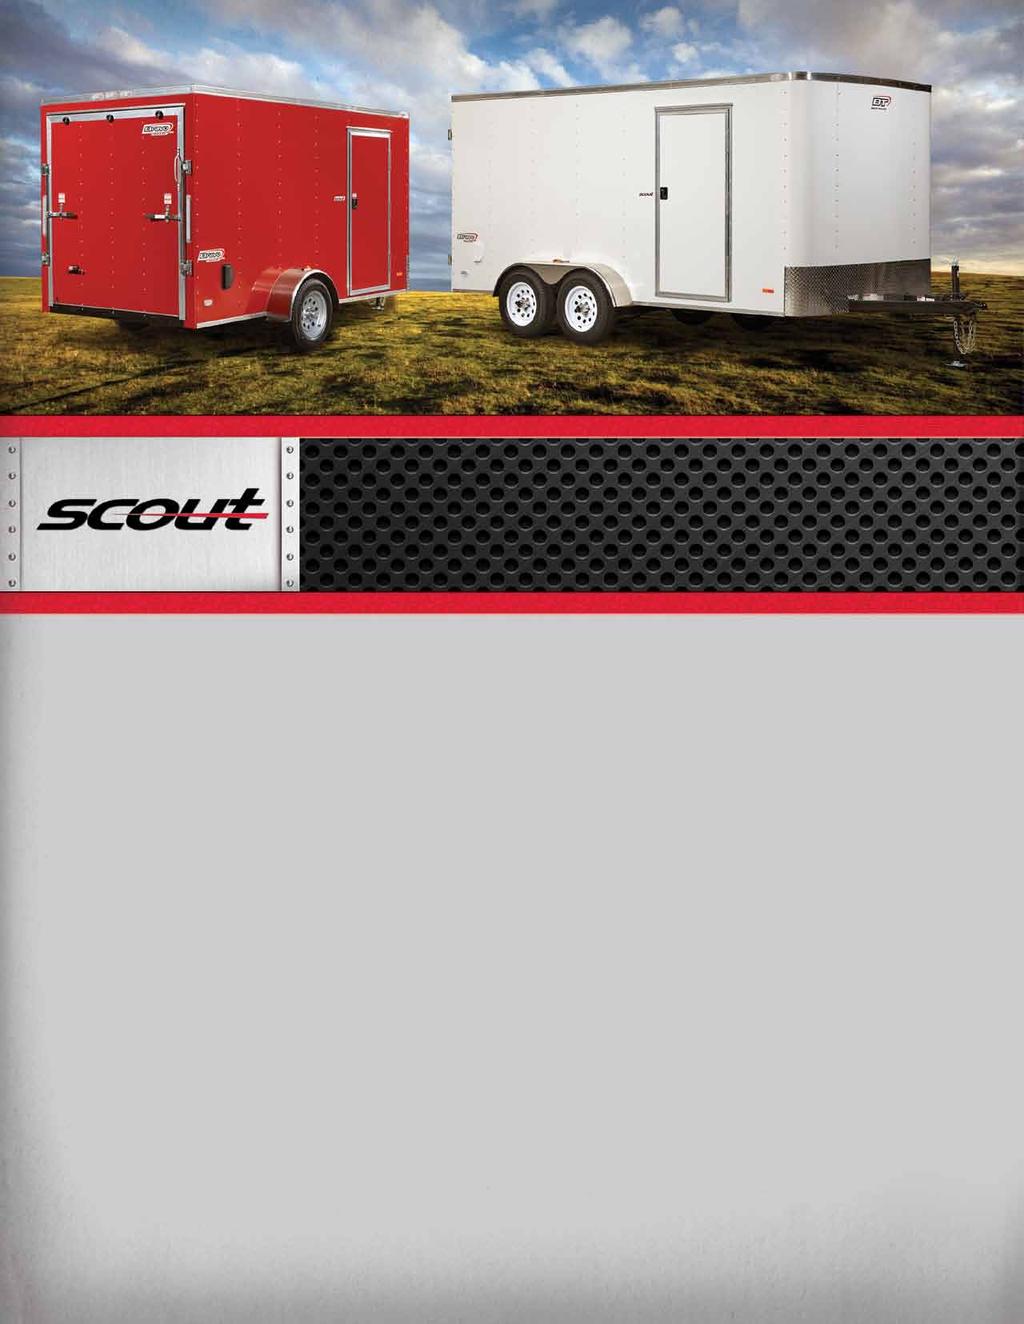 6 x 12 7 x 14 SCOUT TRAILERS BY BRAVO are not your typical throw away entry level trailers.